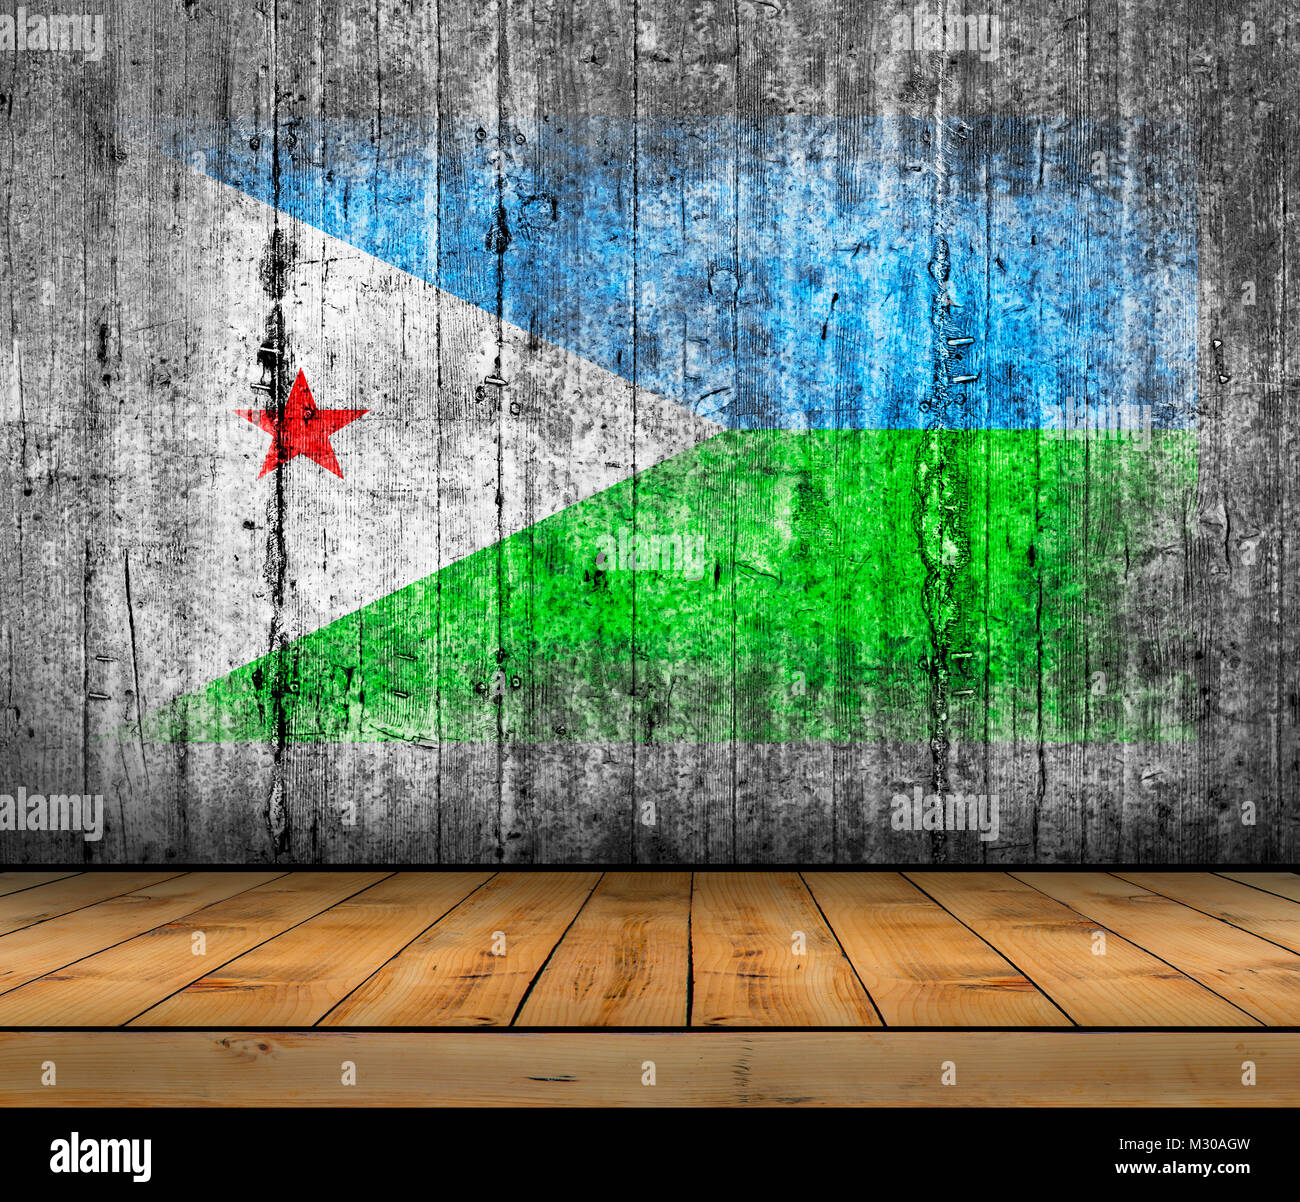 Djibouti flag painted on background texture gray concrete with wooden floor Stock Photo